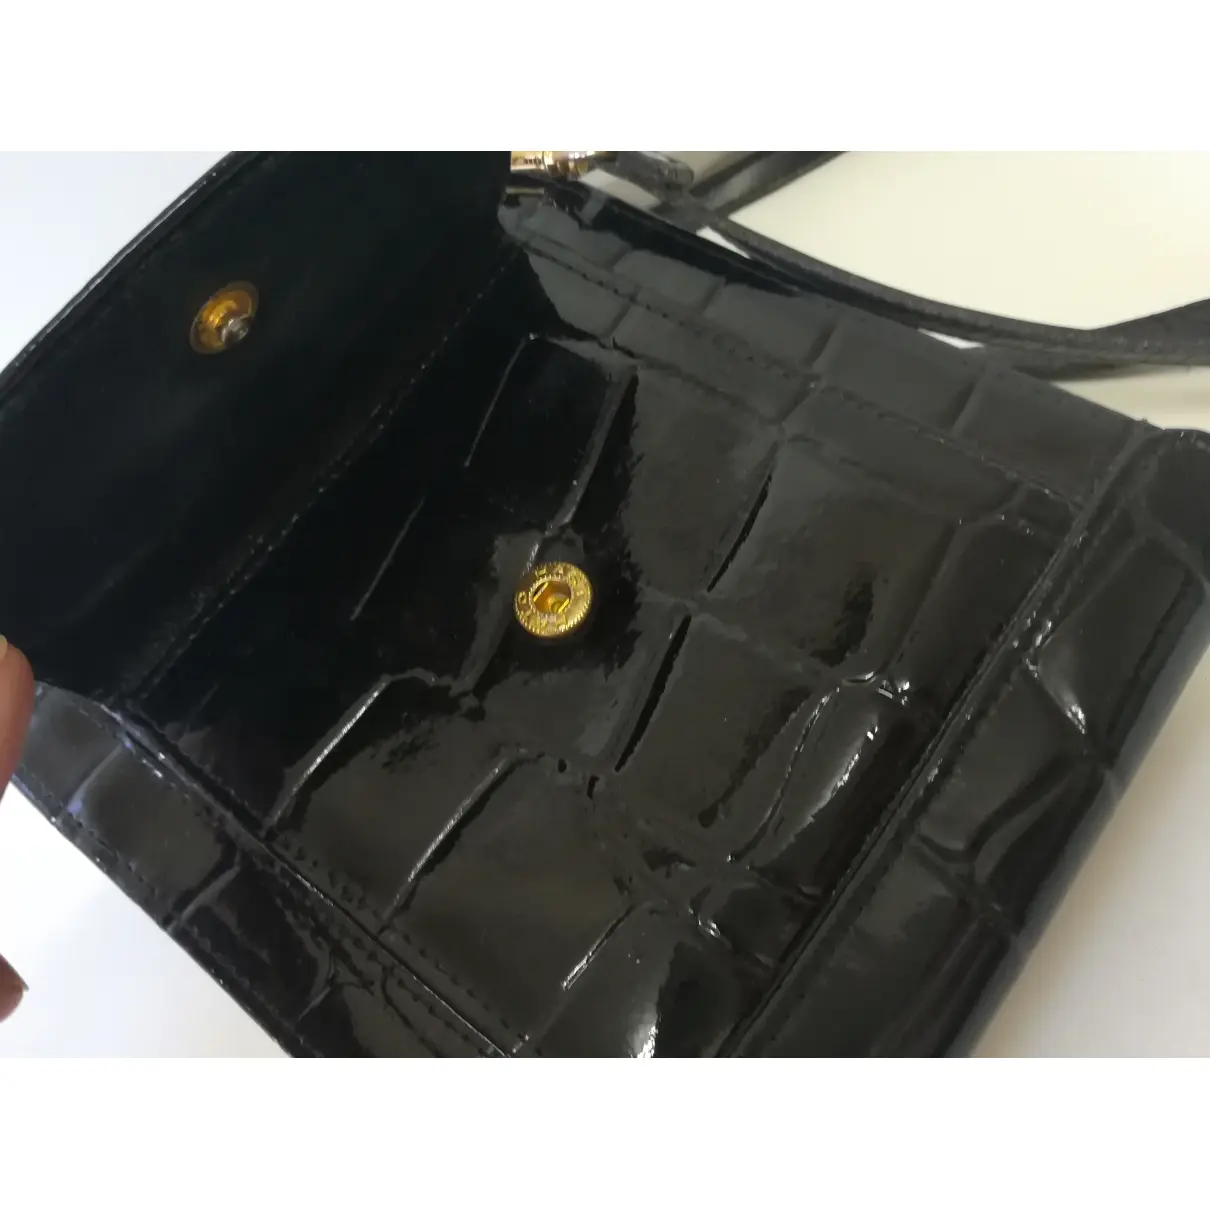 Patent leather clutch bag Gianni Versace - Vintage